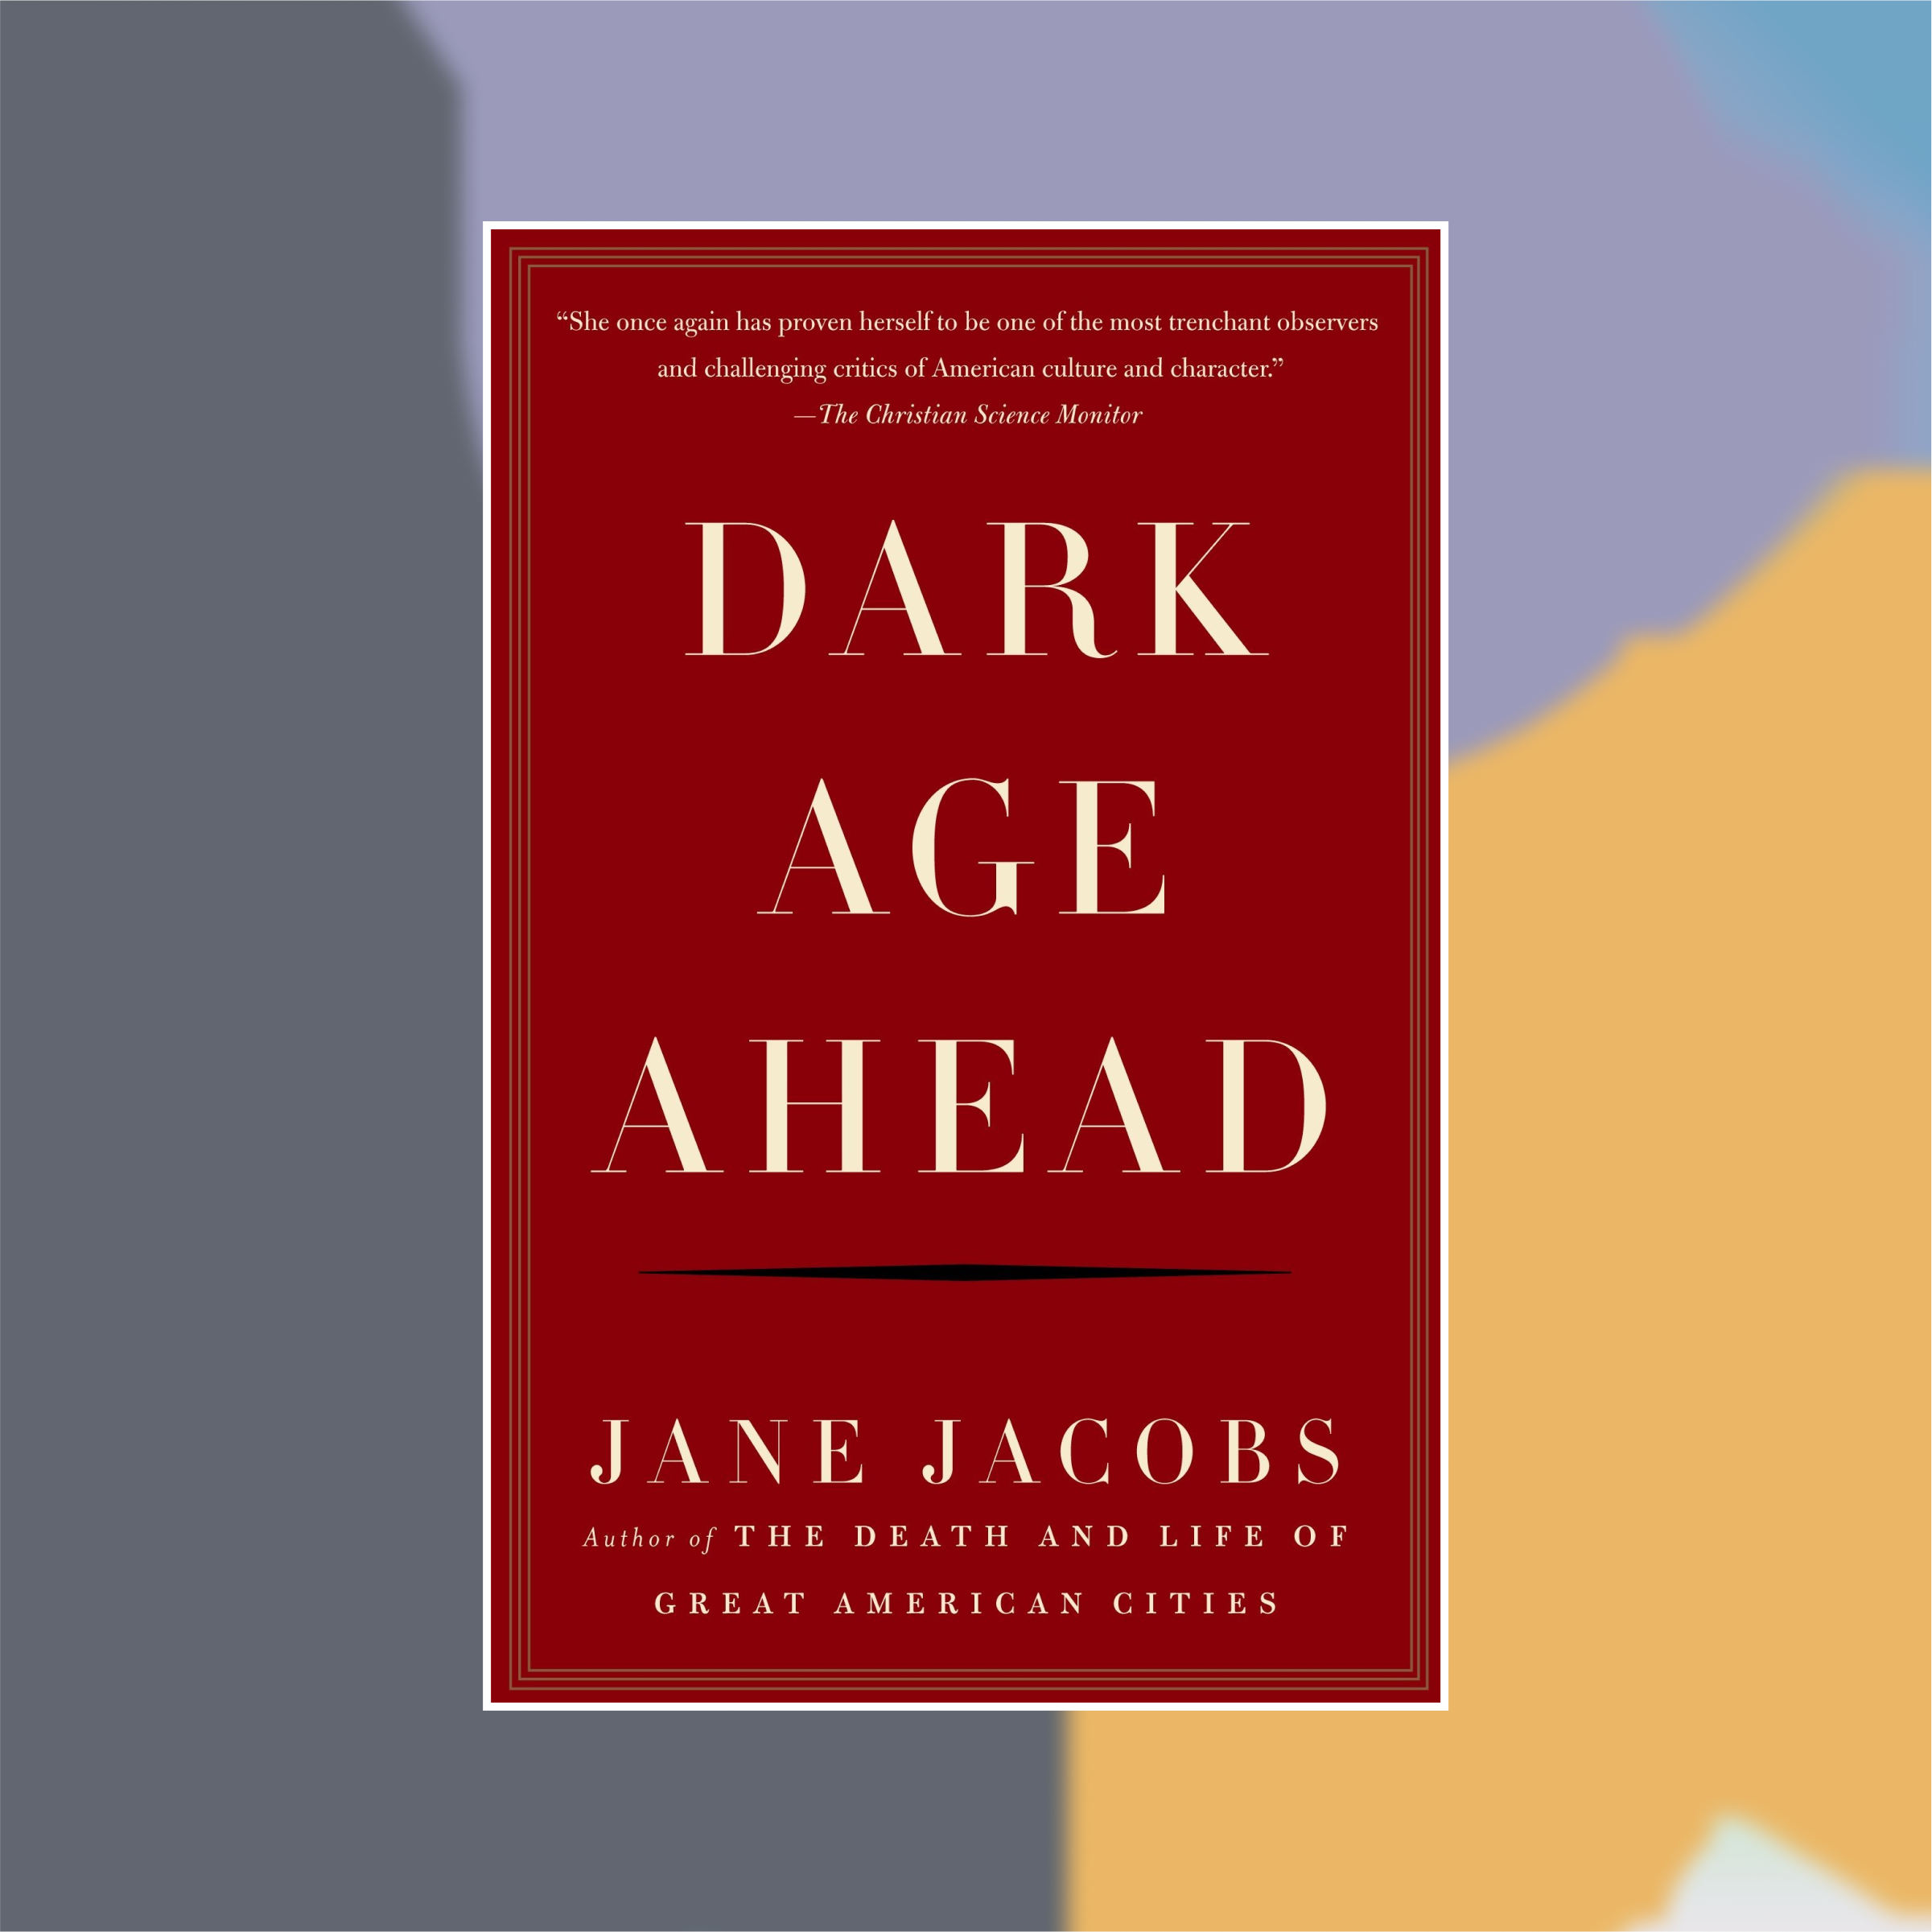 Book cover of Dark Age Ahead against an abstract painted background